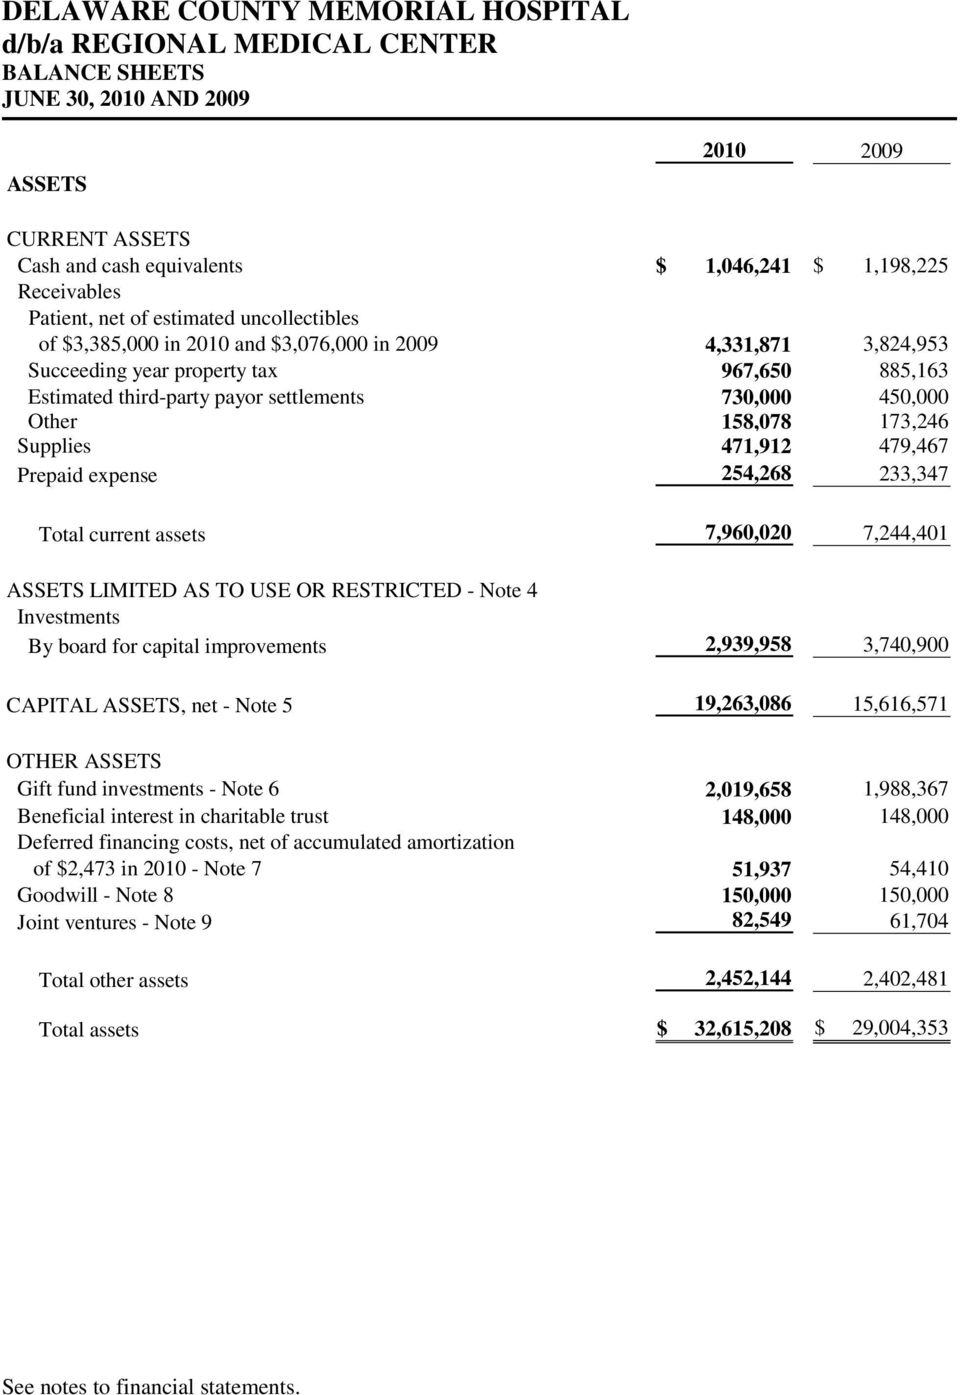 expense 254,268 233,347 Total current assets 7,960,020 7,244,401 ASSETS LIMITED AS TO USE OR RESTRICTED - Note 4 Investments By board for capital improvements 2,939,958 3,740,900 CAPITAL ASSETS, net